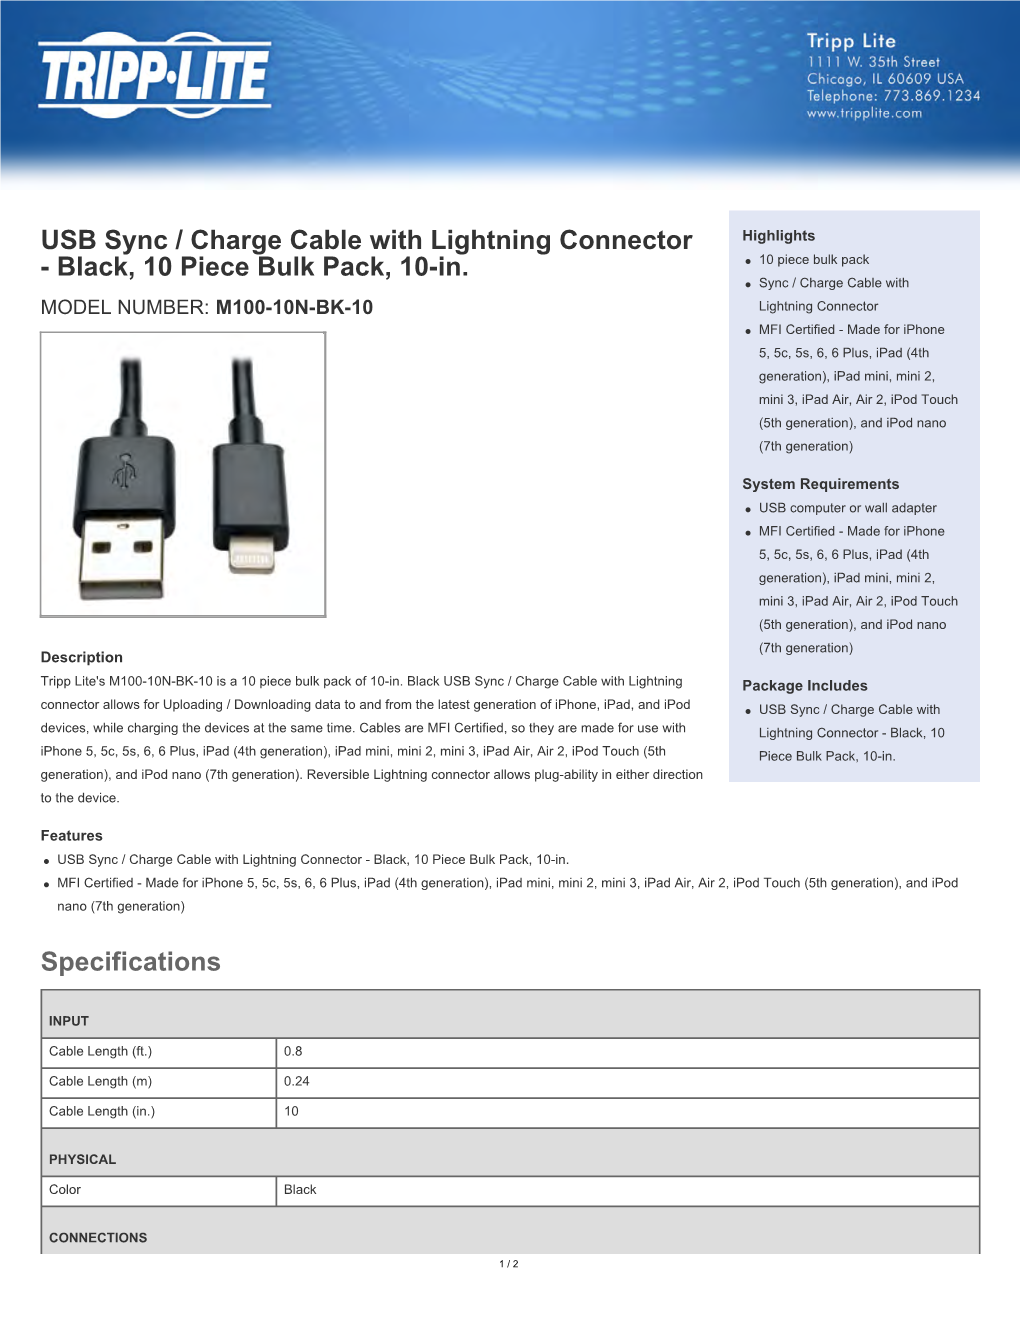 USB Sync / Charge Cable with Lightning Connector Highlights - Black, 10 Piece Bulk Pack, 10-In